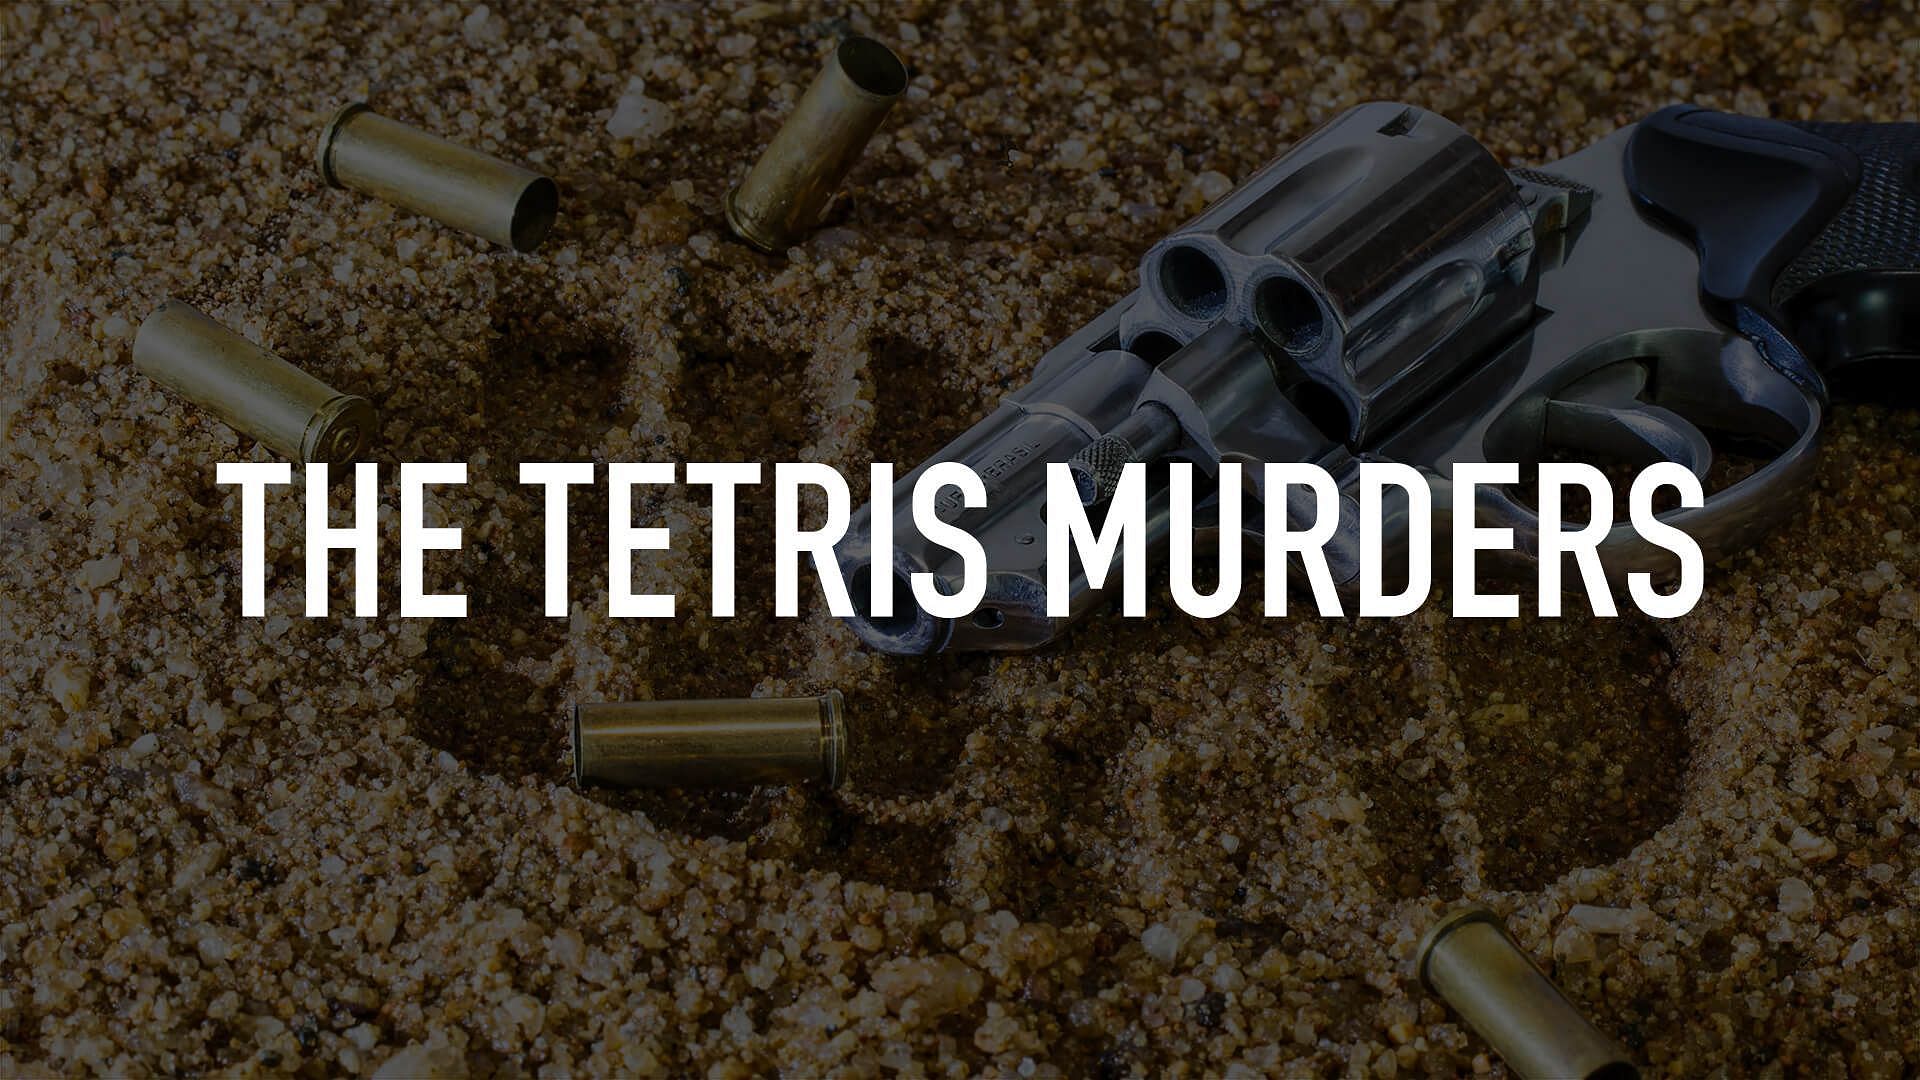 The Tetris Murders: Who was Vladimir Pokhilko and what did he create?